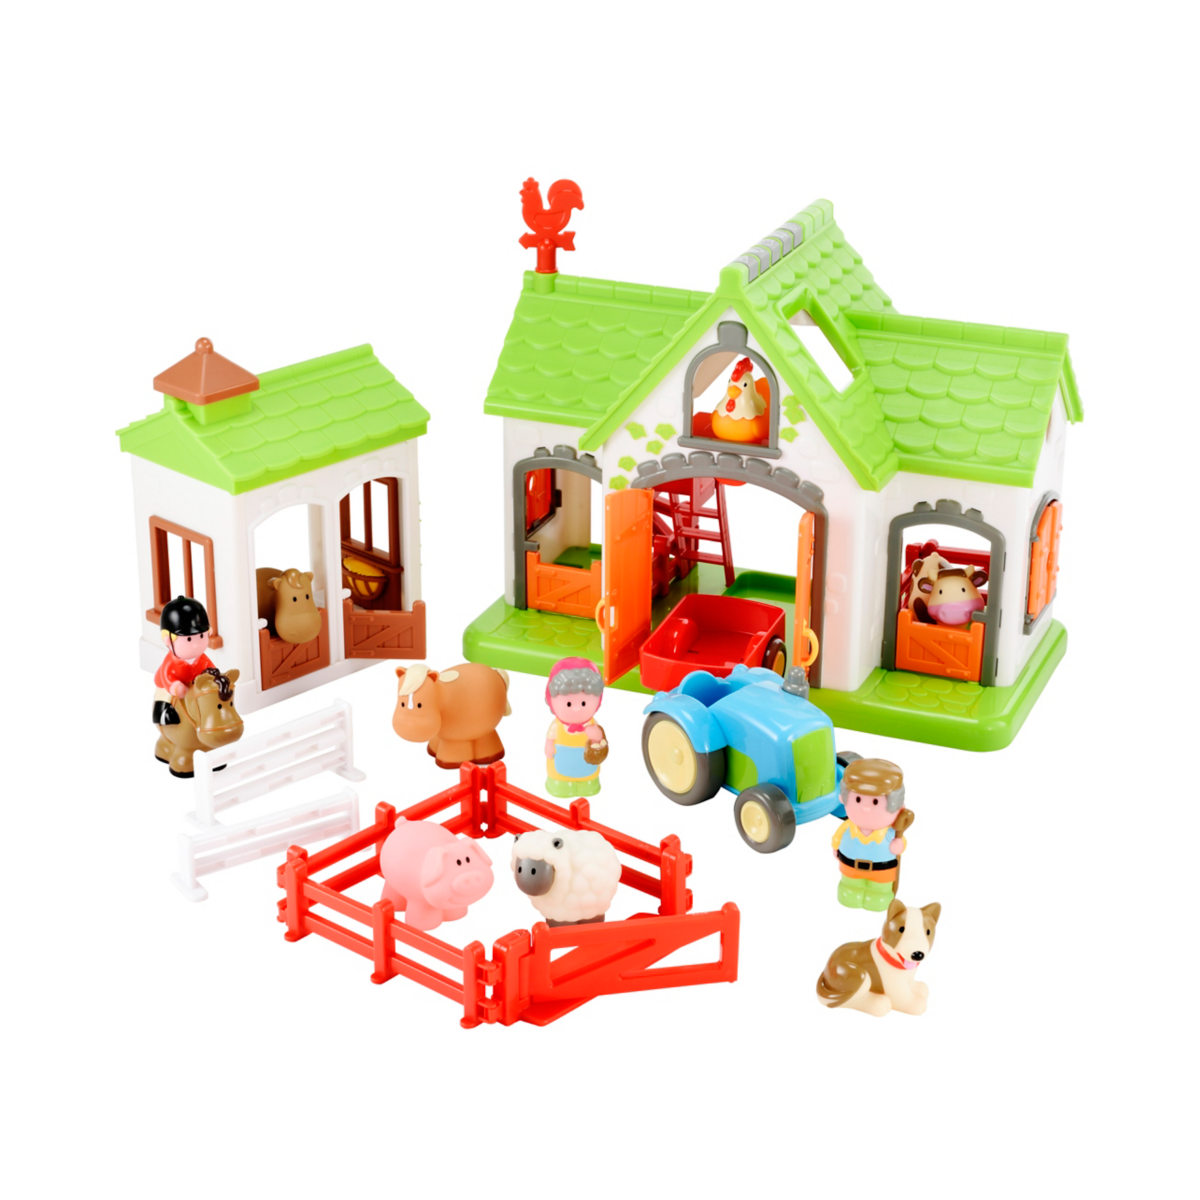 Happyland Farm Playset | Early Learning Centre